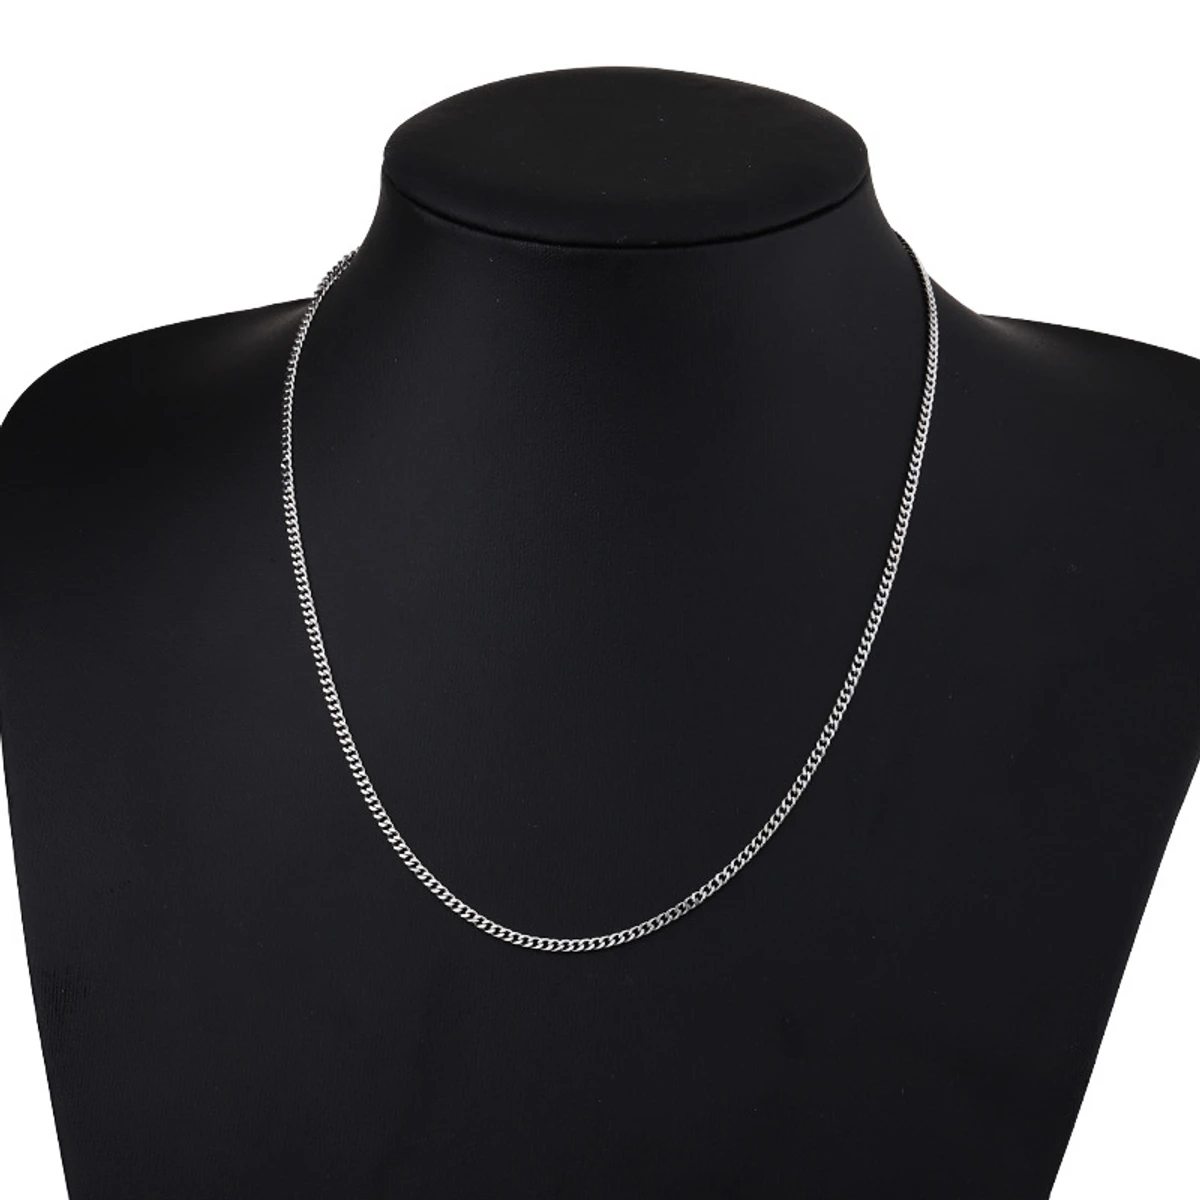 Silver Necklace Mens Chain Stainless Steel stylish Necklace